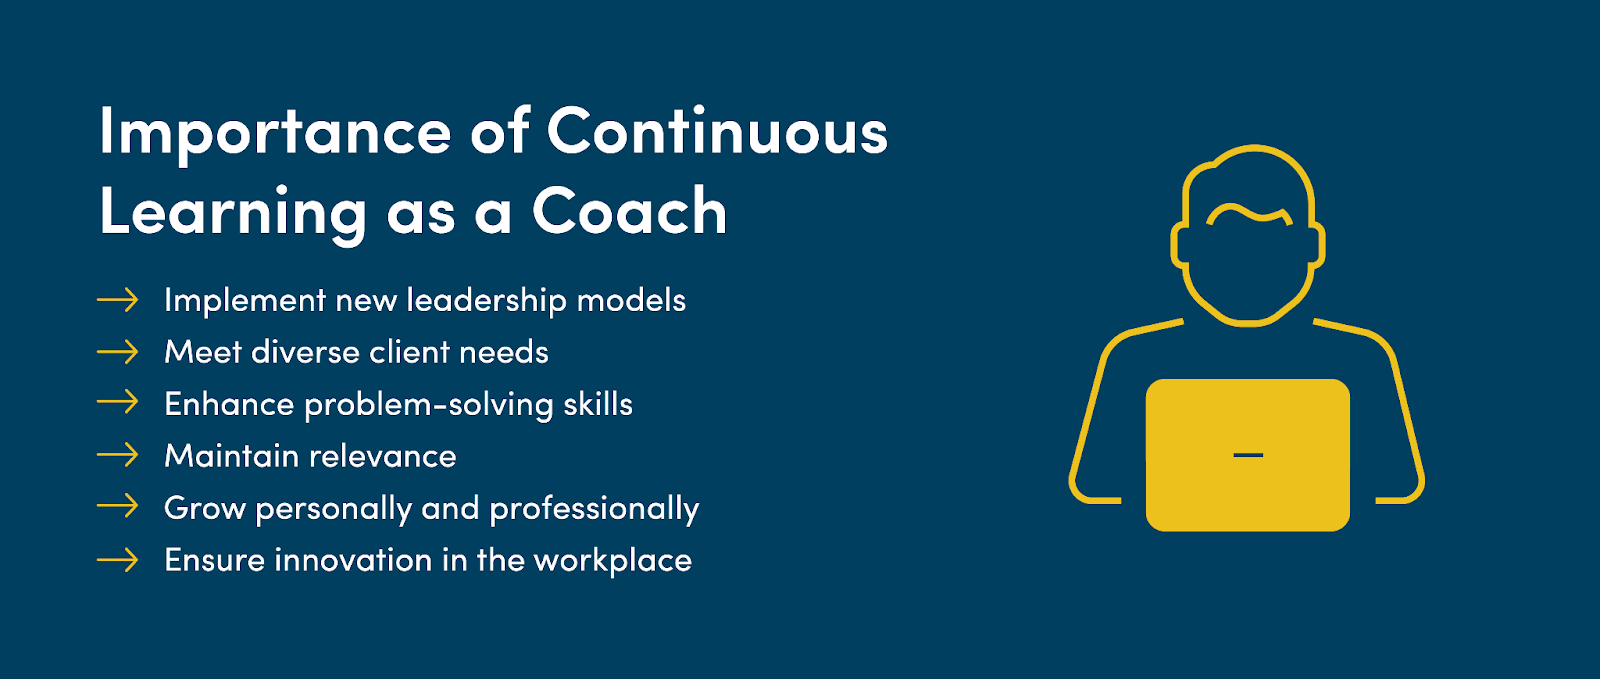 Importance of continuous learning as a coach